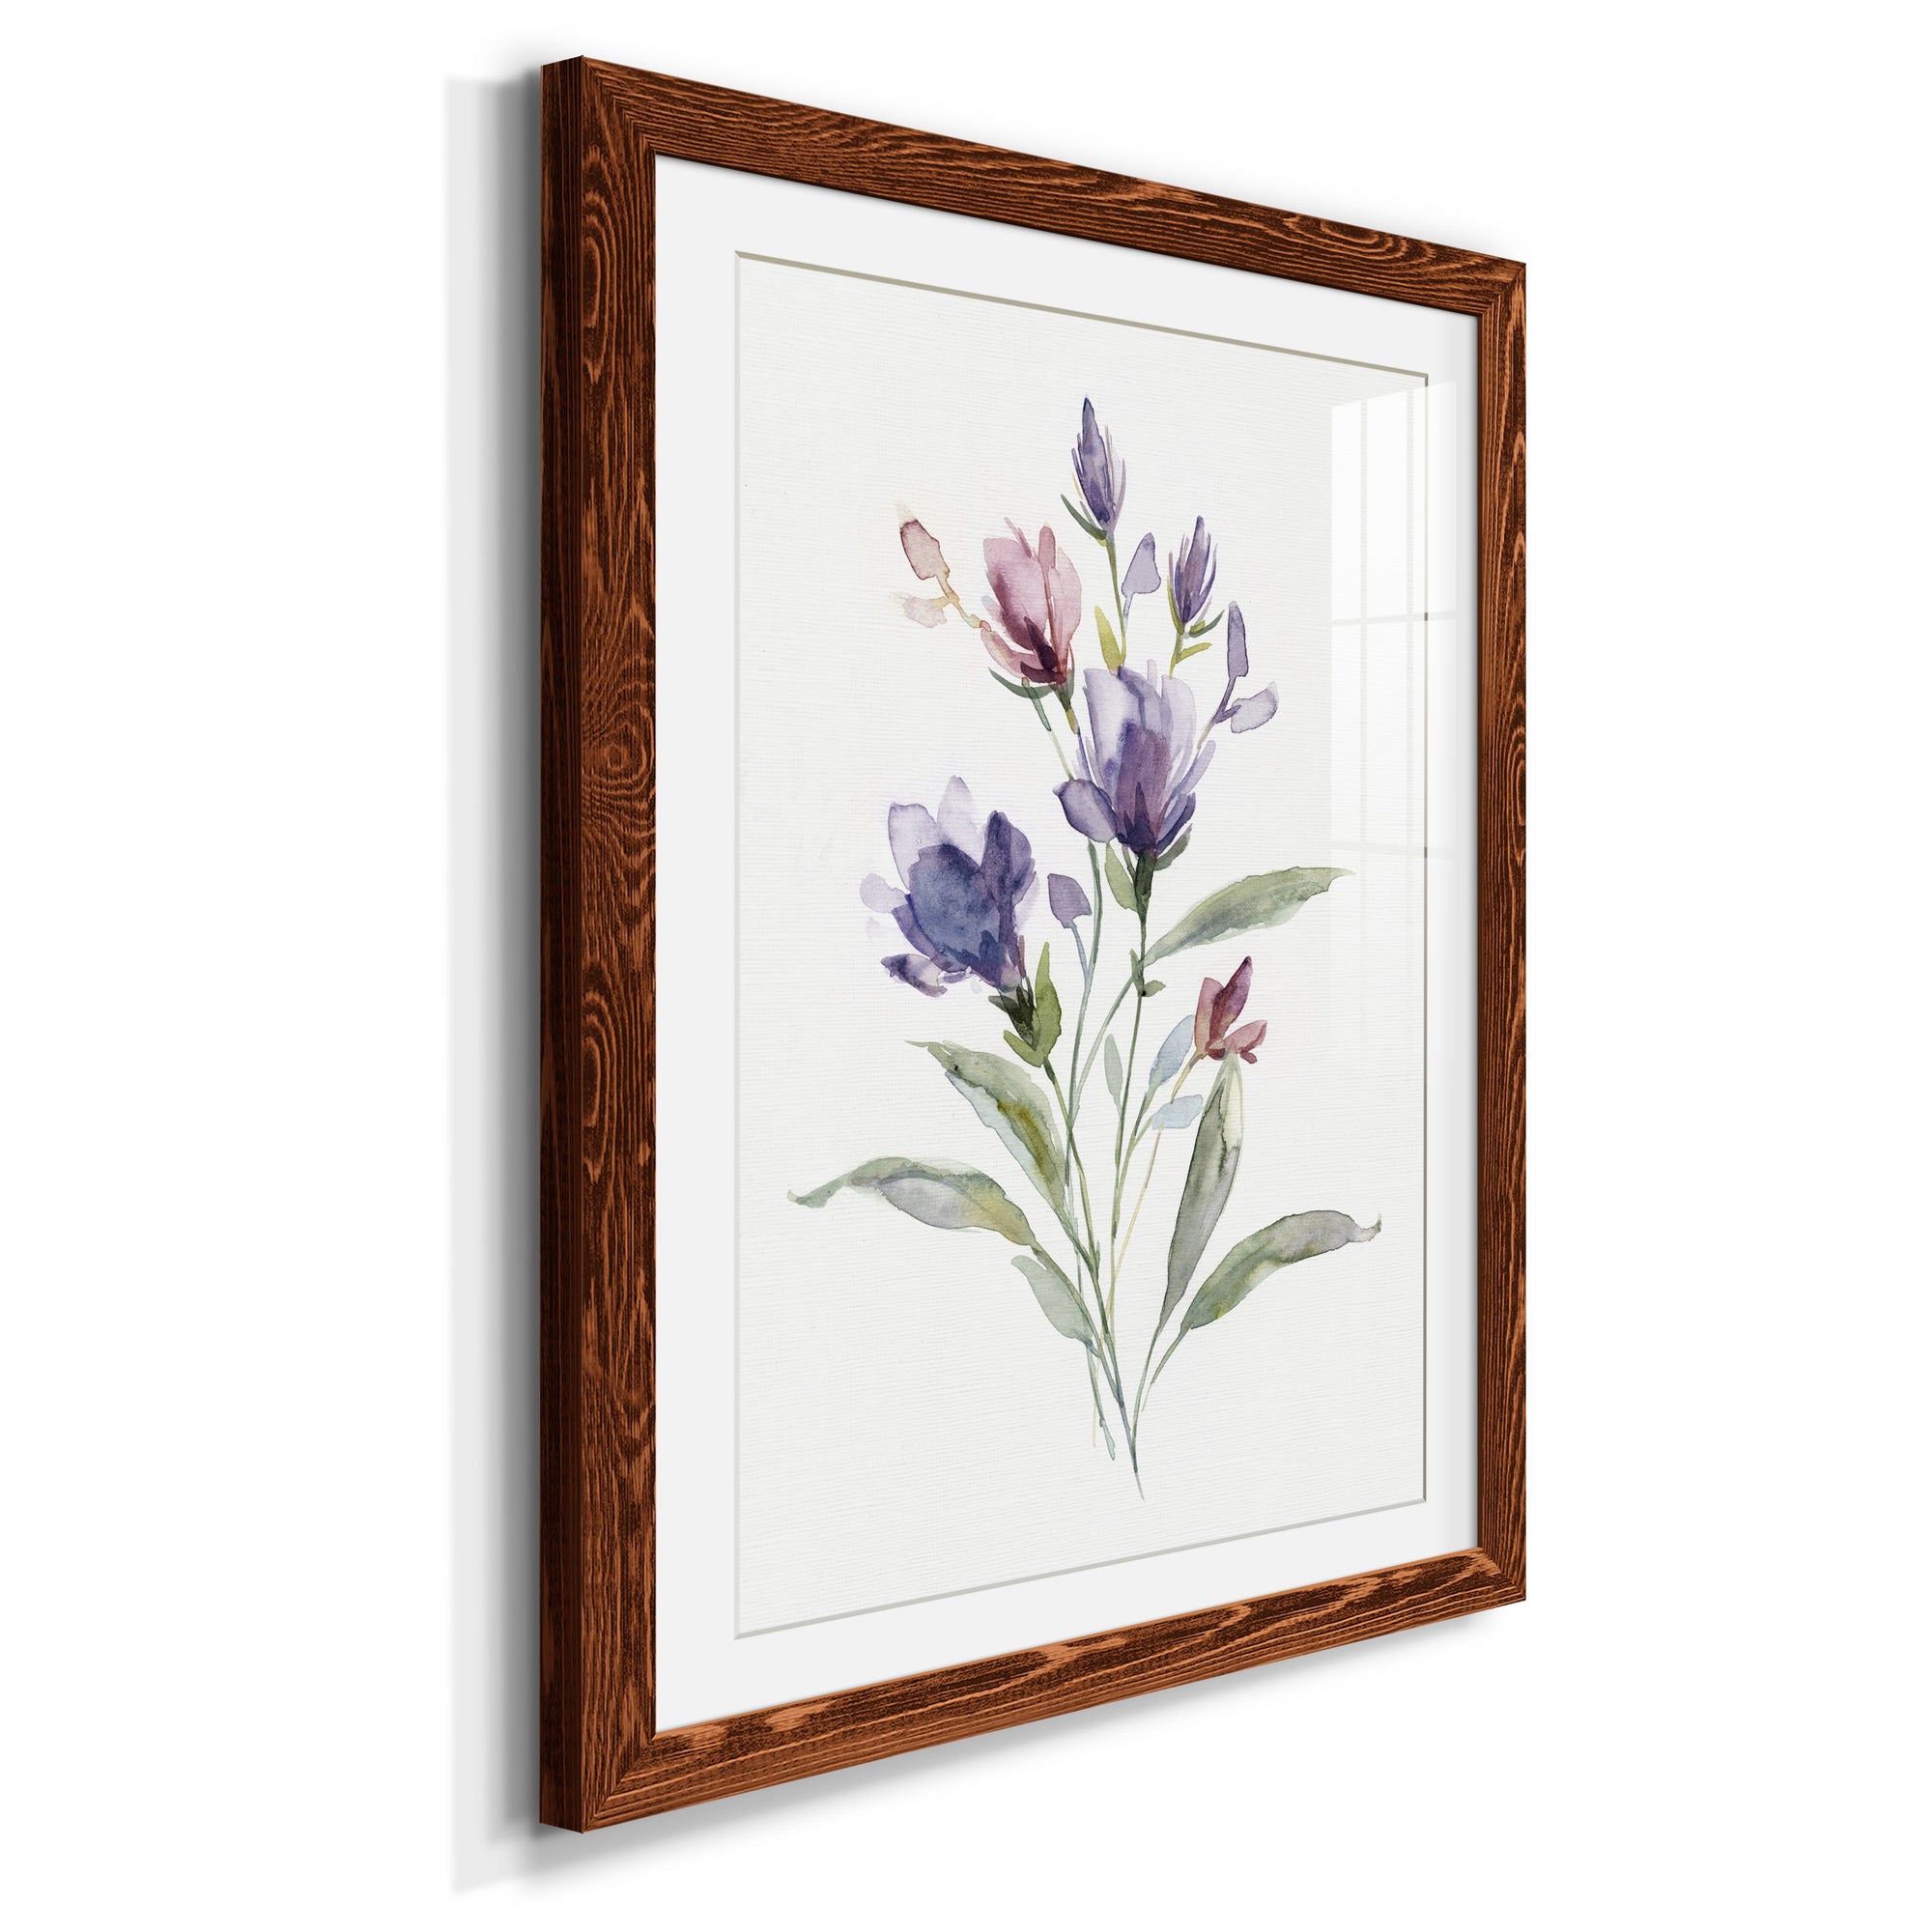 Color Variety IV - Premium Framed Print - Distressed Barnwood Frame - Ready to Hang